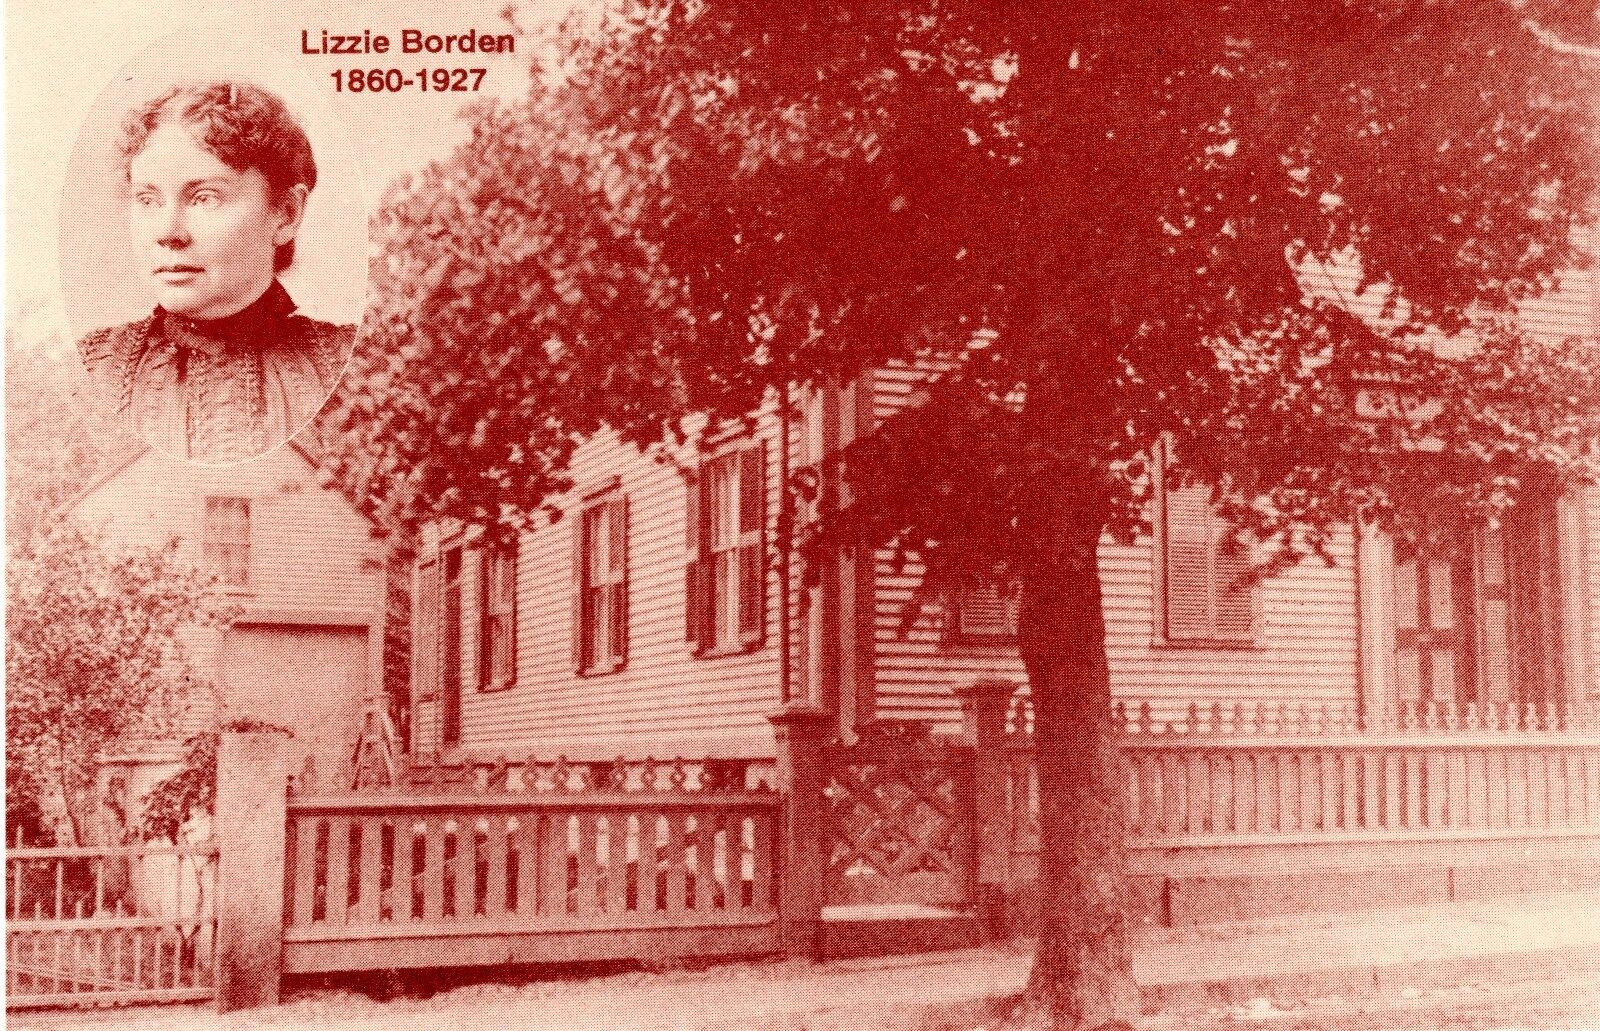 LIZZIE BORDEN POSTCARD-Aug.4th, 1892 -130th Annivesary this year.  Best Seller